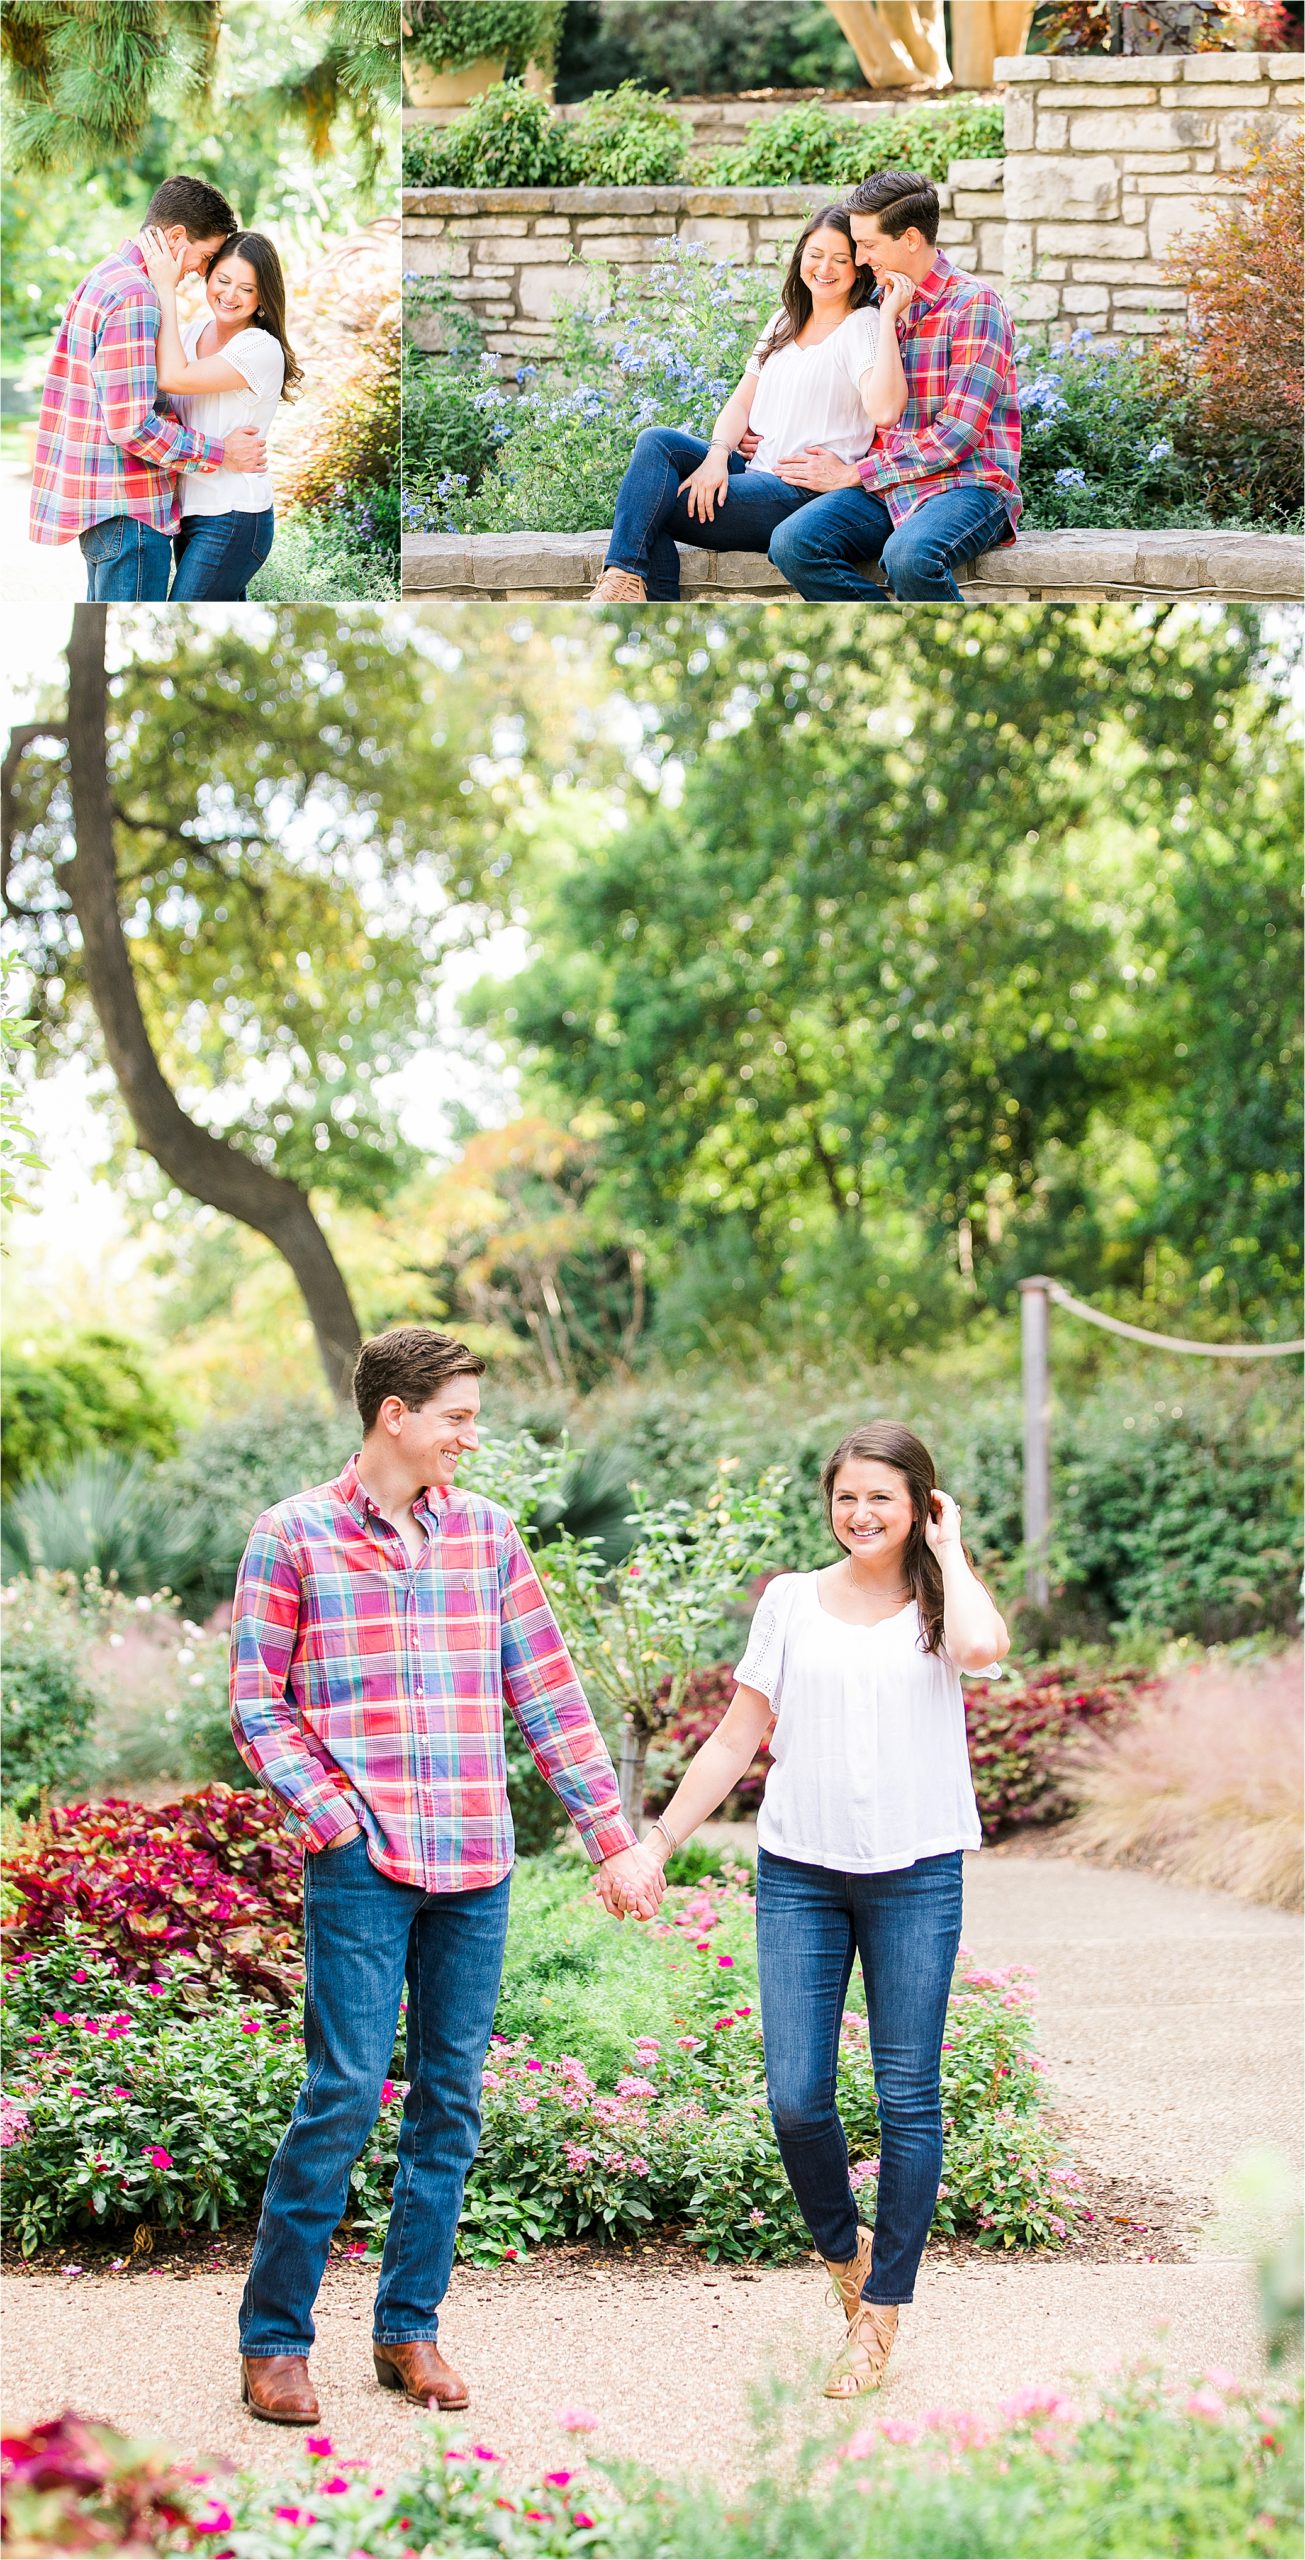 Best Engagement Ideas in Fort Worth Texas including the Fort Worth Botanic Gardens